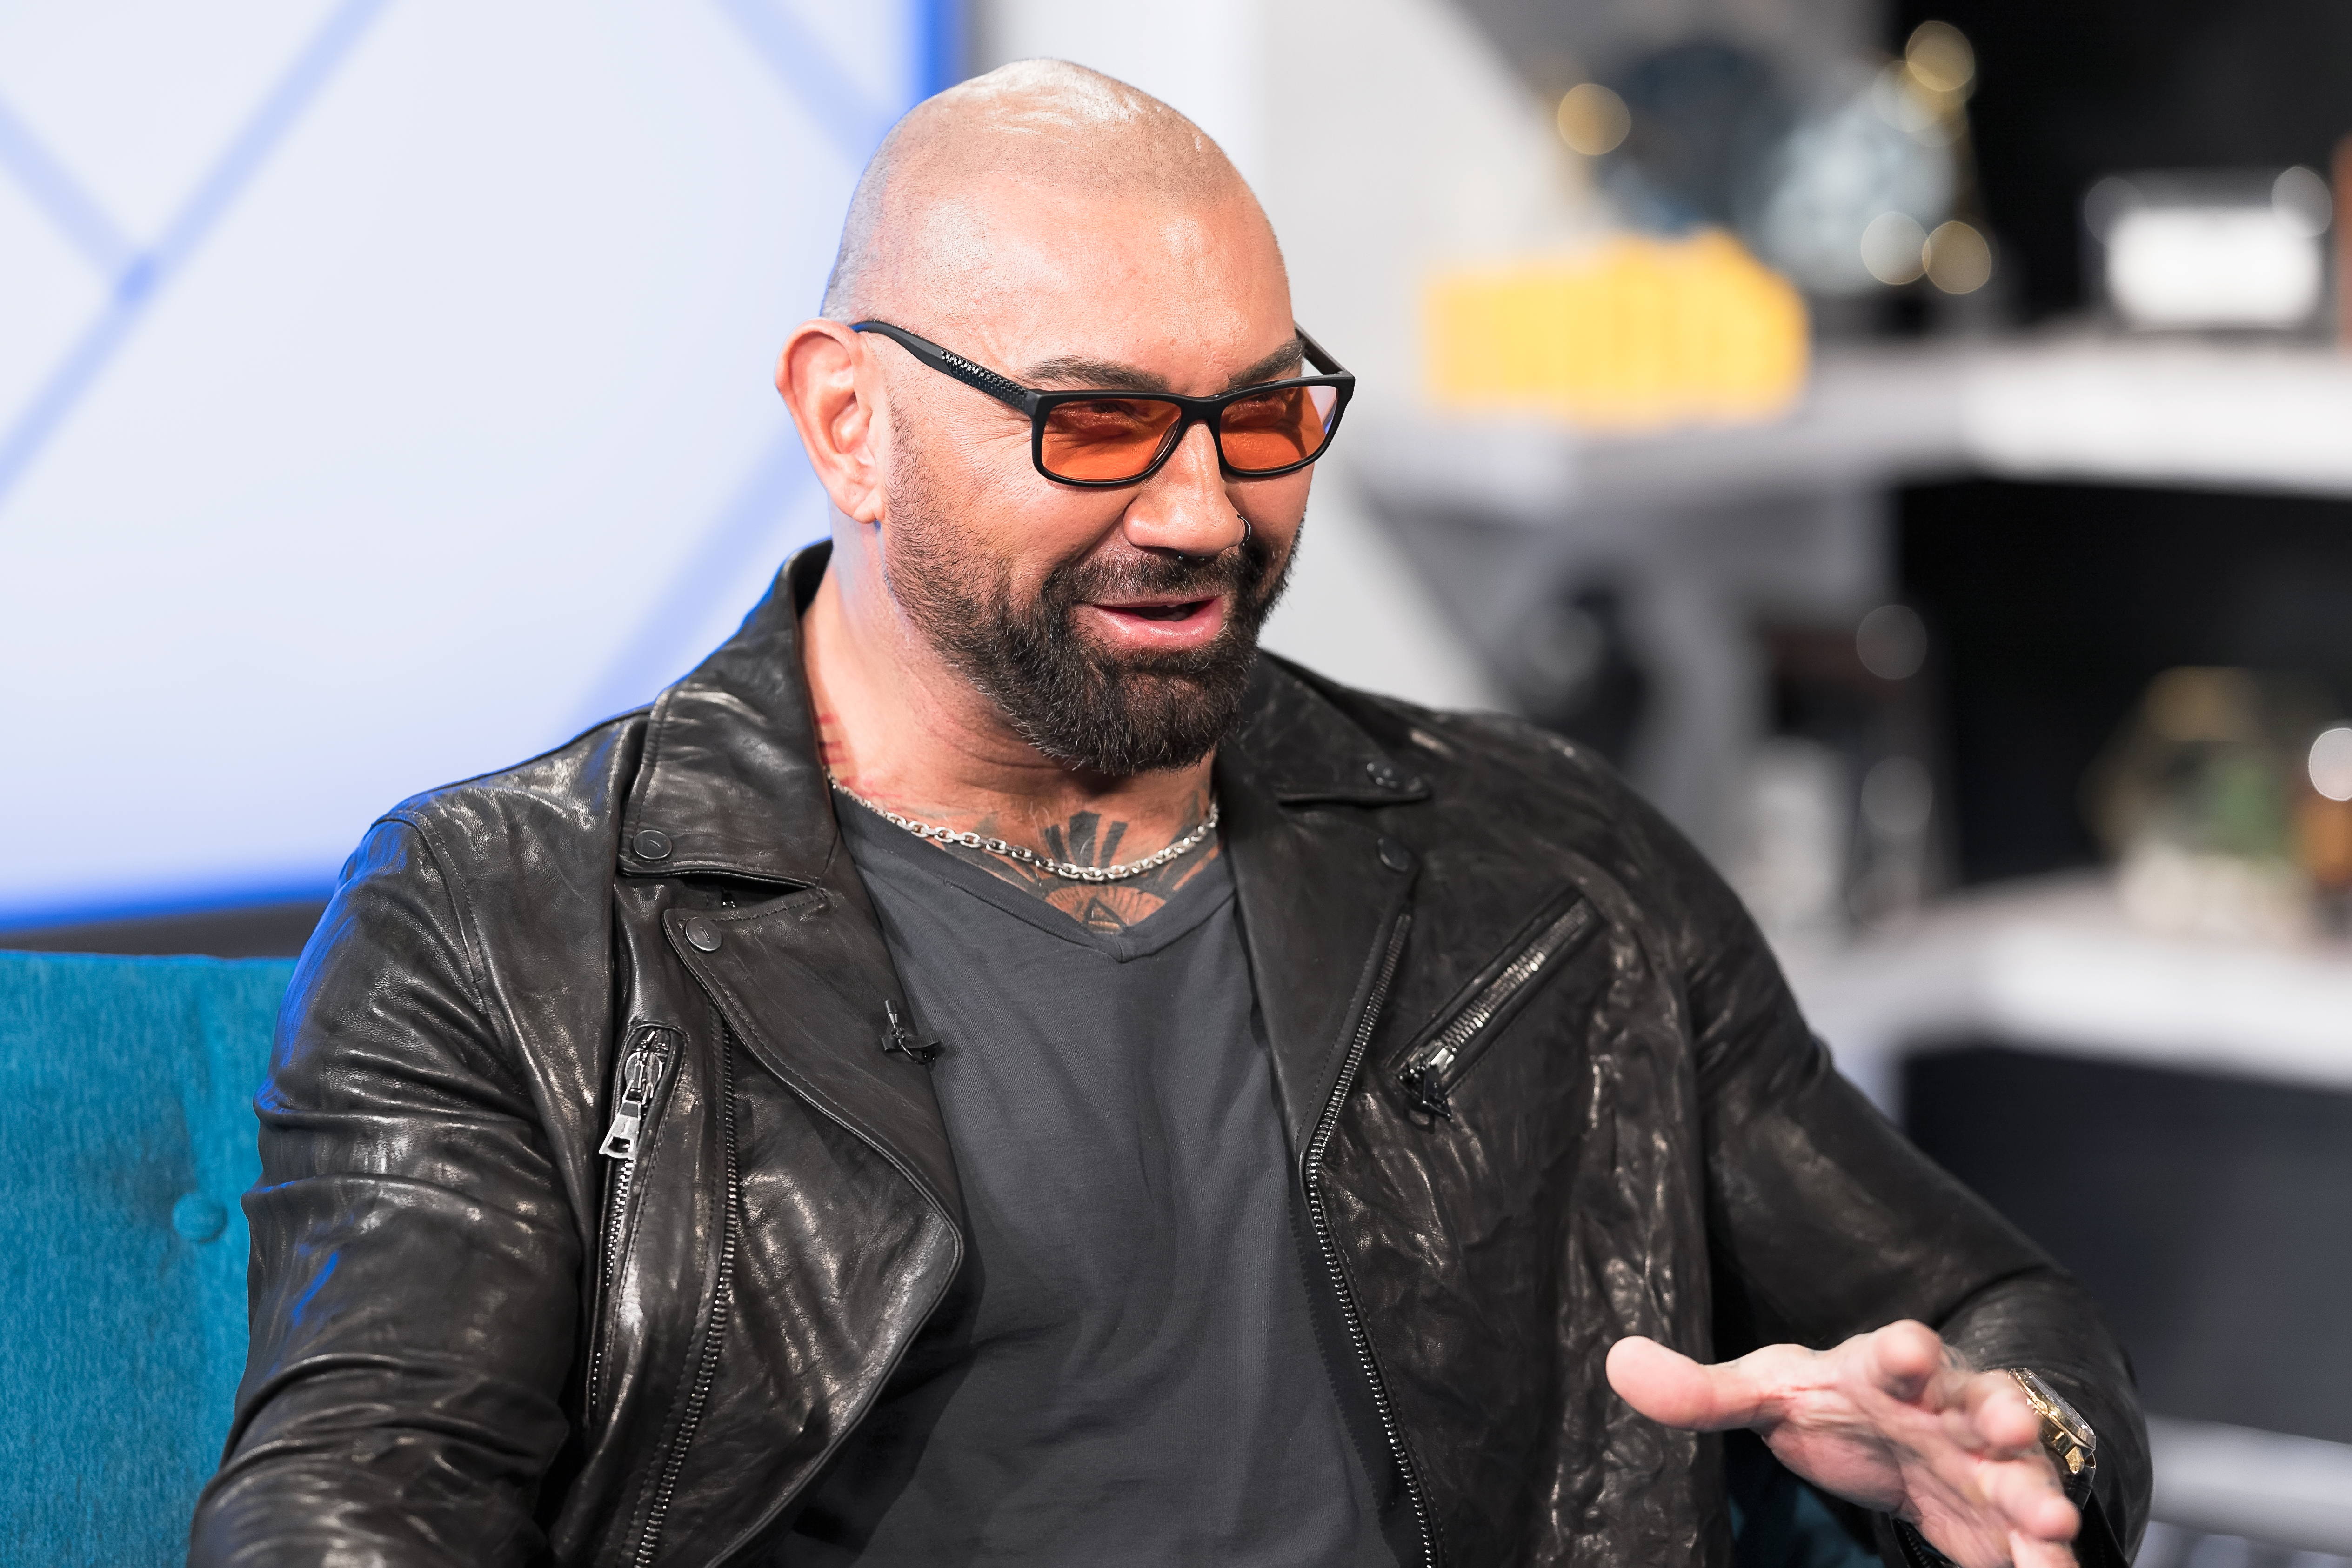 Dave Bautista visits 'The IMDb Show' on February 21, 2020, in Santa Monica, California. | Source: Getty Images